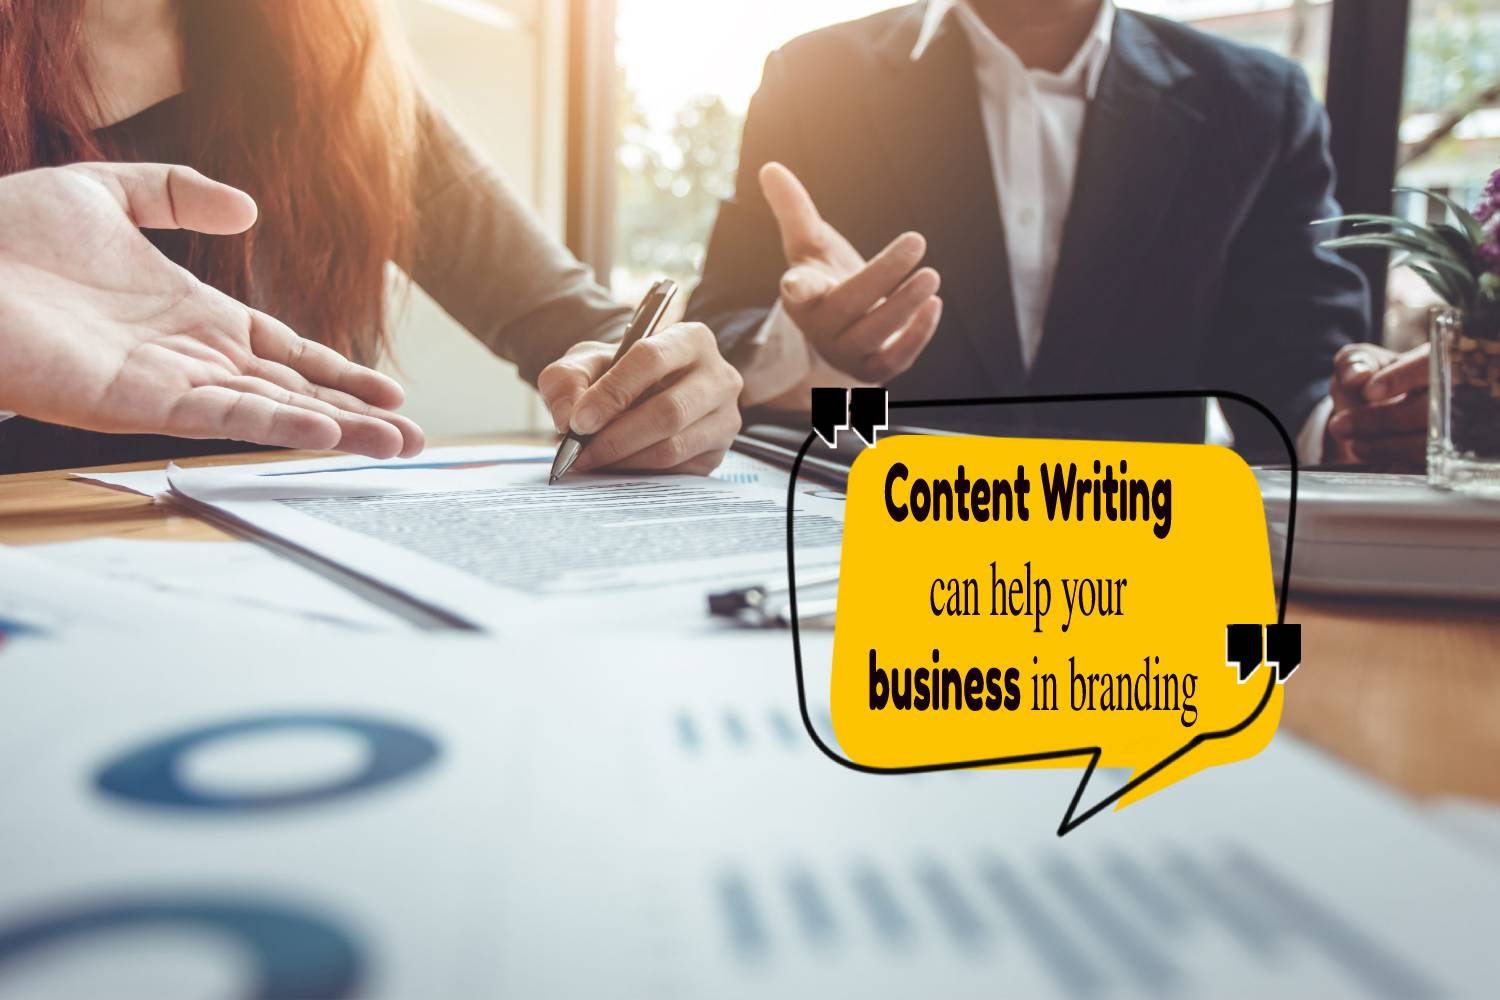 How content writing can help your business in branding